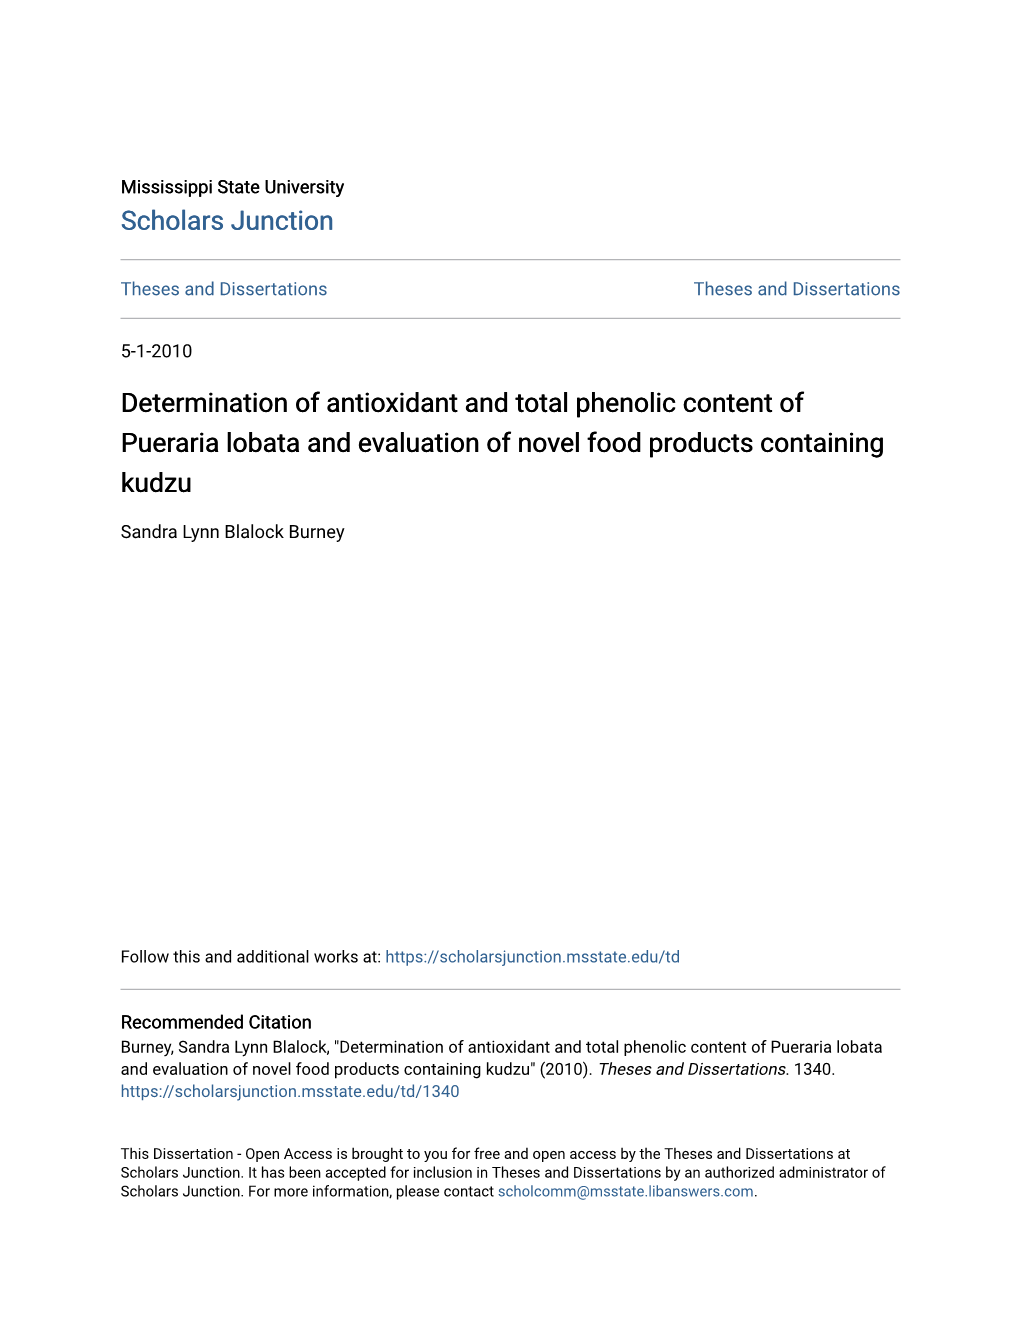 Determination of Antioxidant and Total Phenolic Content of Pueraria Lobata and Evaluation of Novel Food Products Containing Kudzu